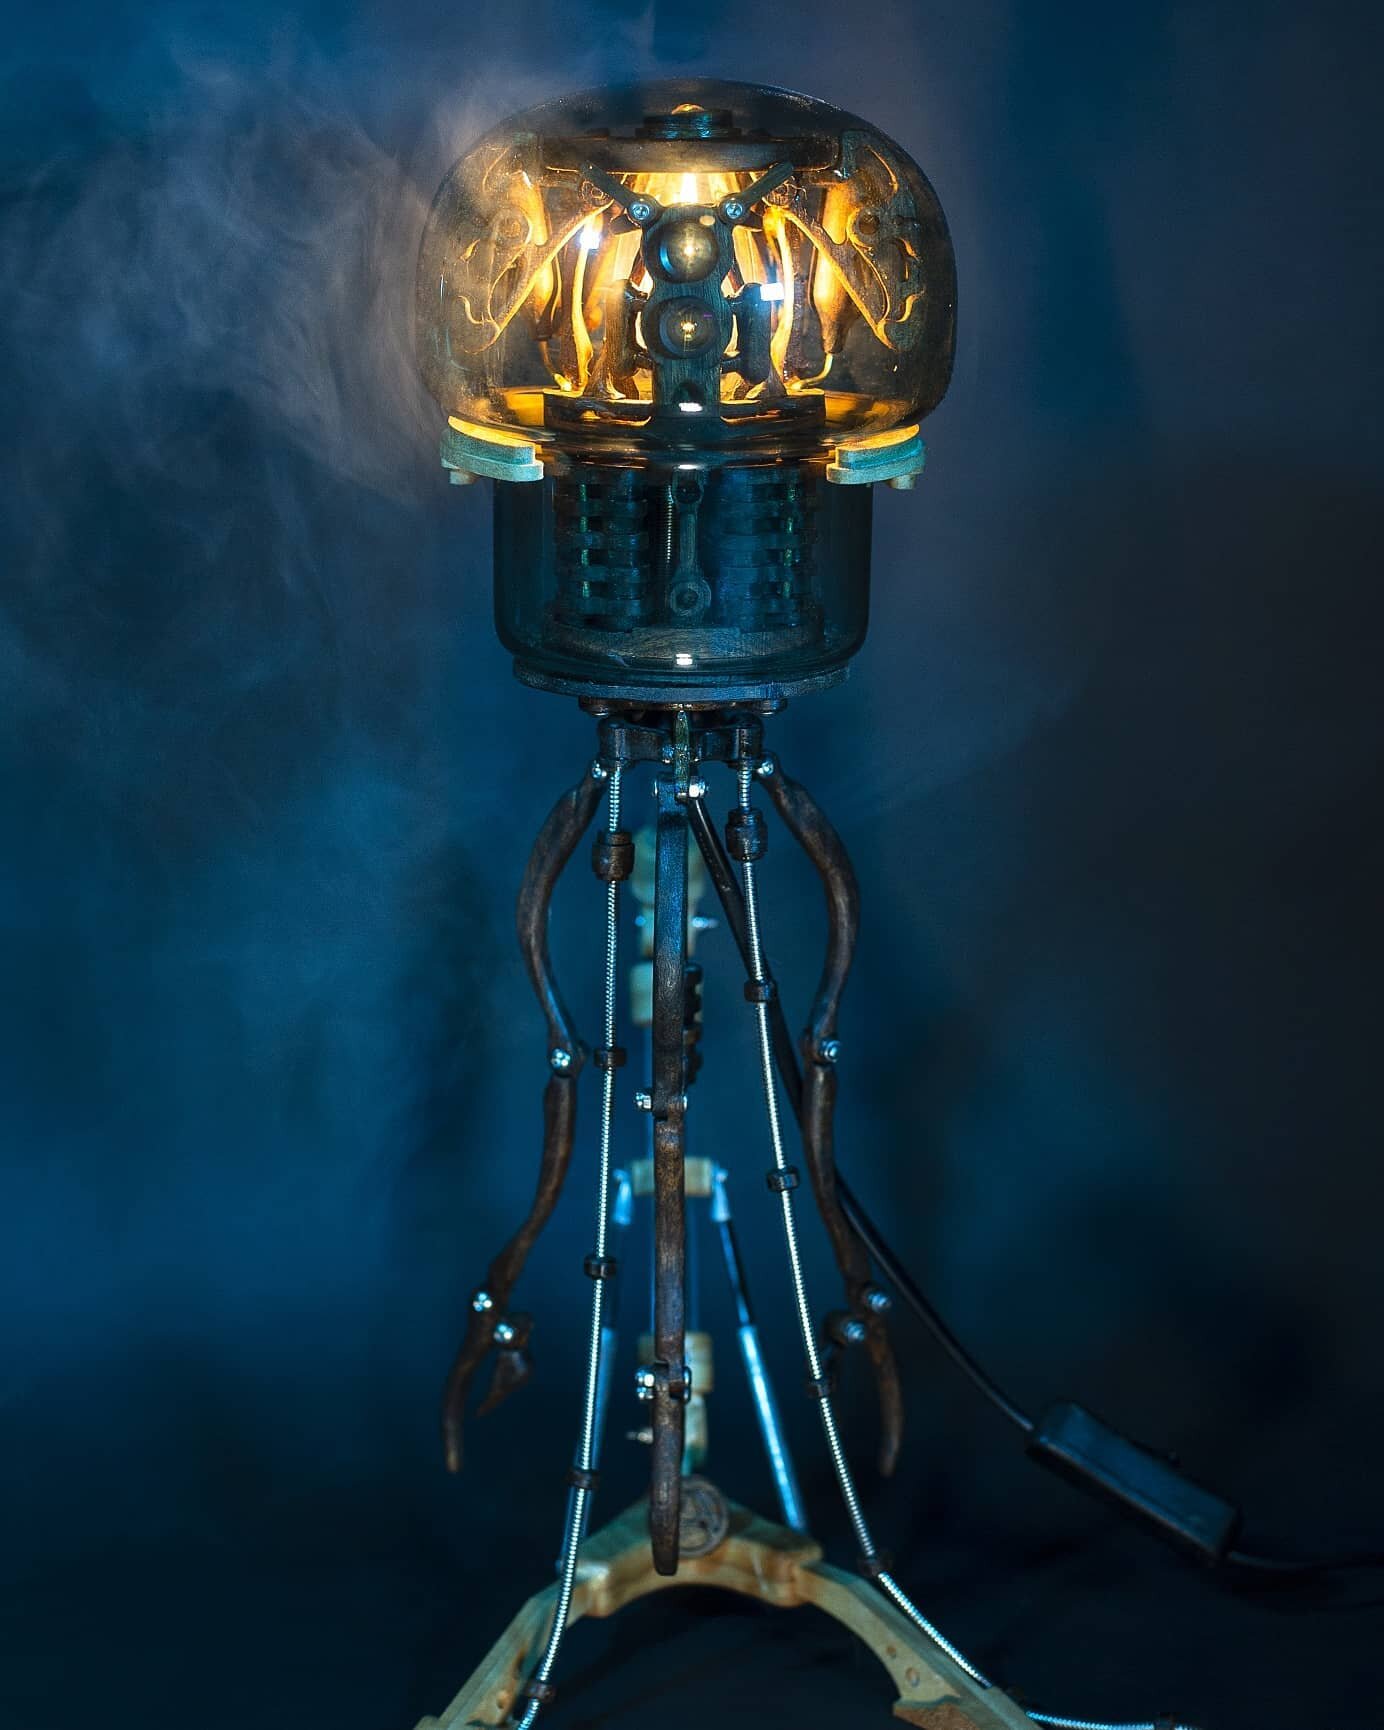 This little lamp, christened &quot;the Duke of jellington&quot; by my wife, was made as a gift for her last year. It was such a learning experience as just like a ship in a bottle, the mechanism had to made &quot;inflate&quot; inside the glass compon